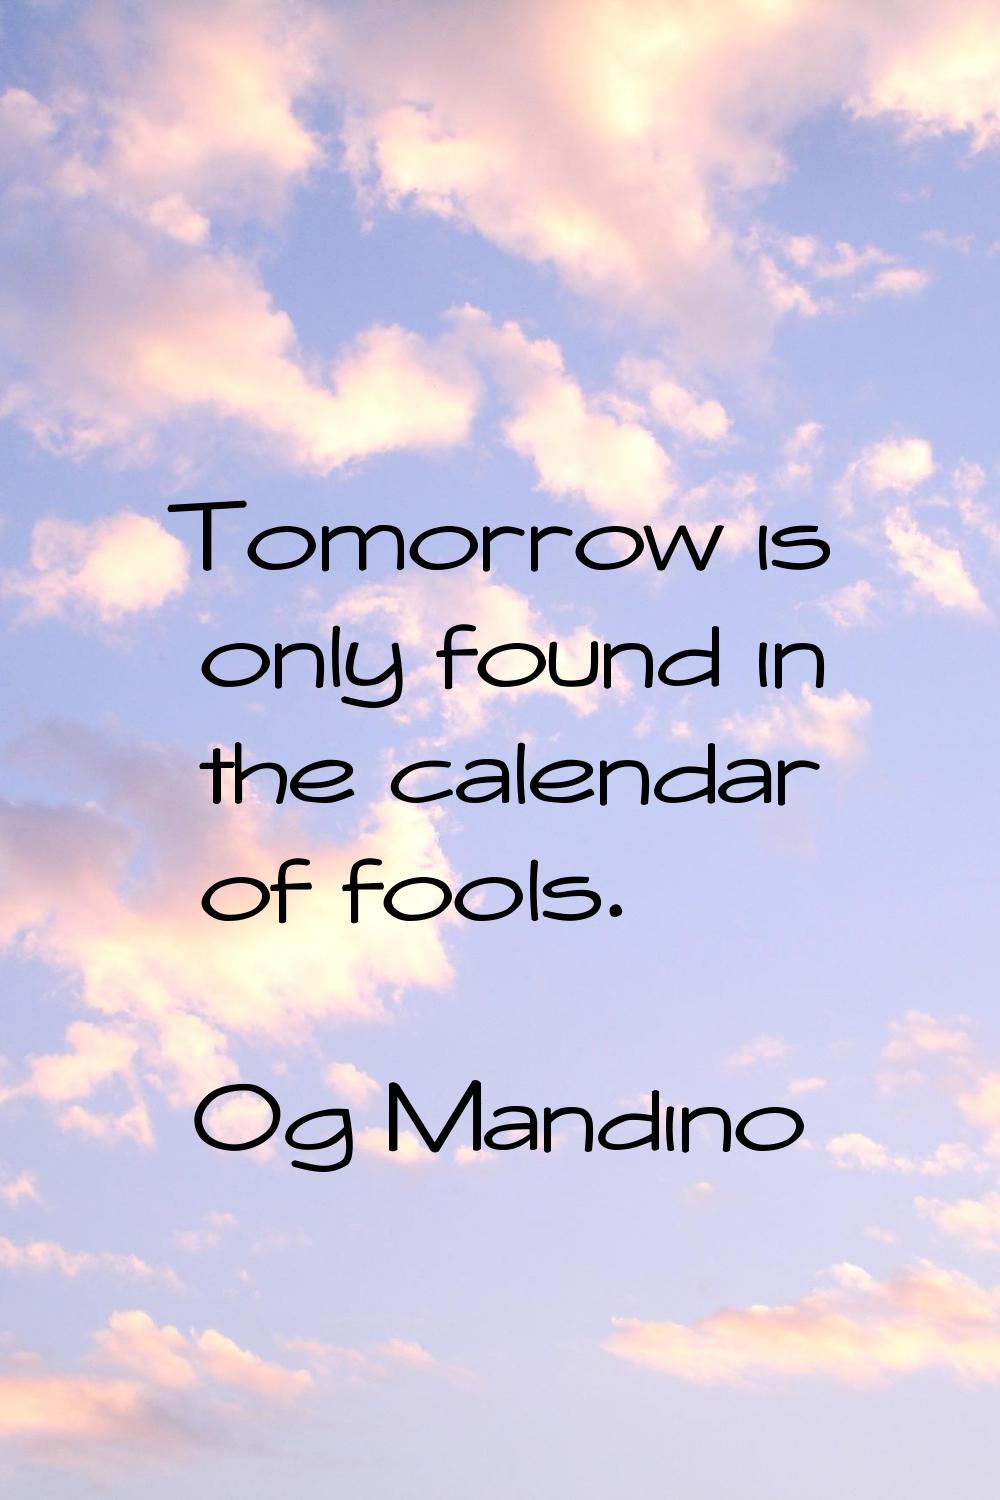 Tomorrow is only found in the calendar of fools.